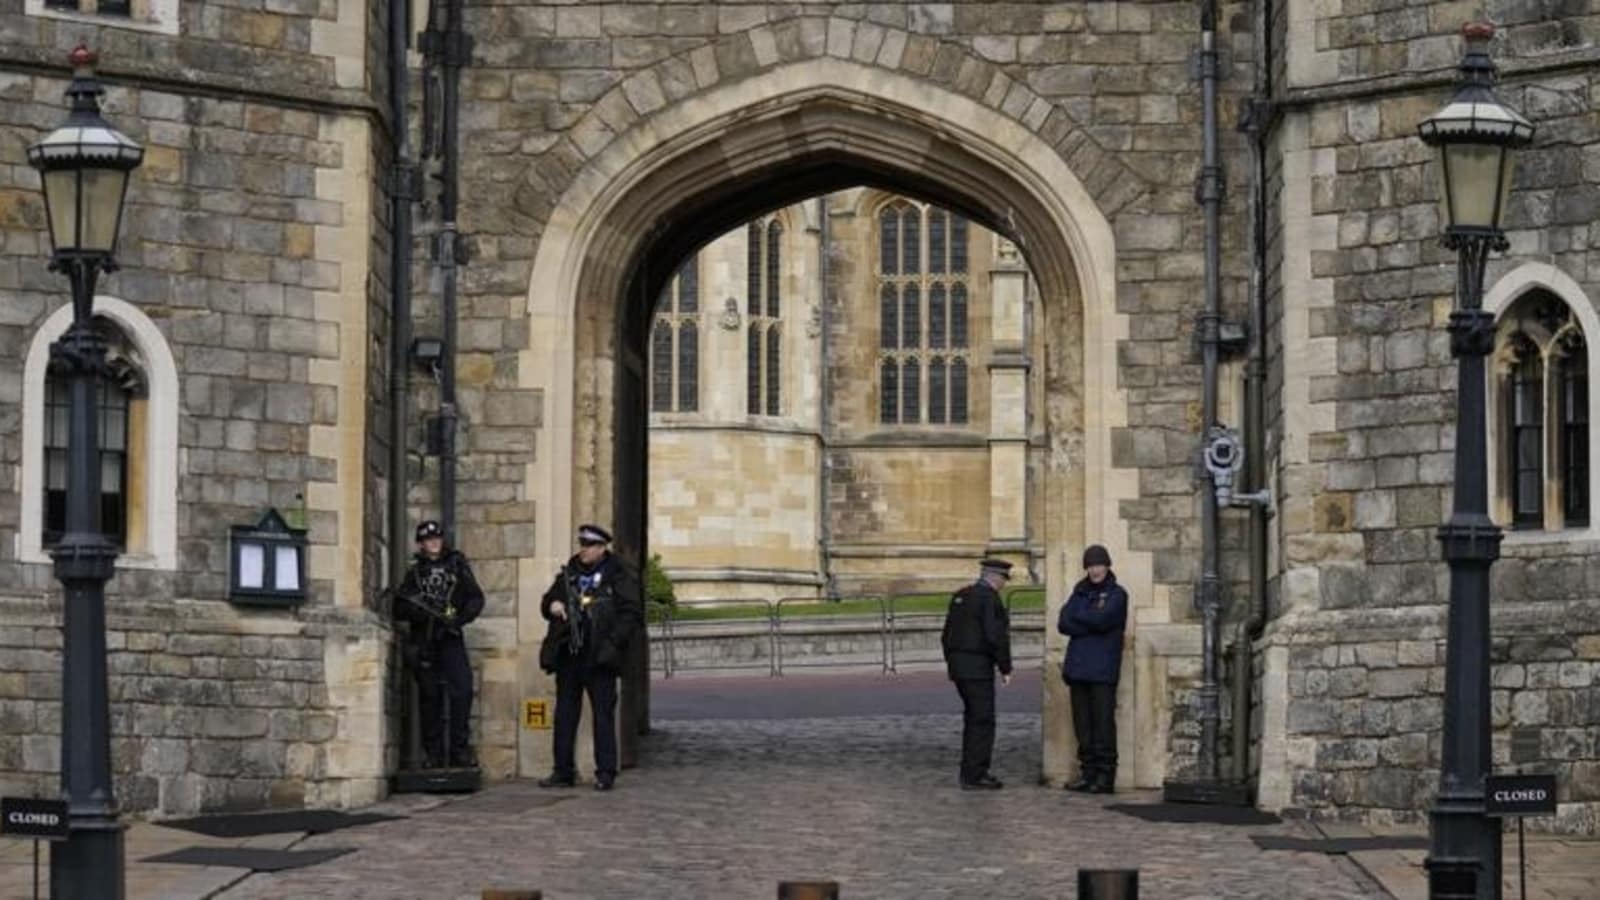 Windsor Castle stops free entry for locals, sparks fury